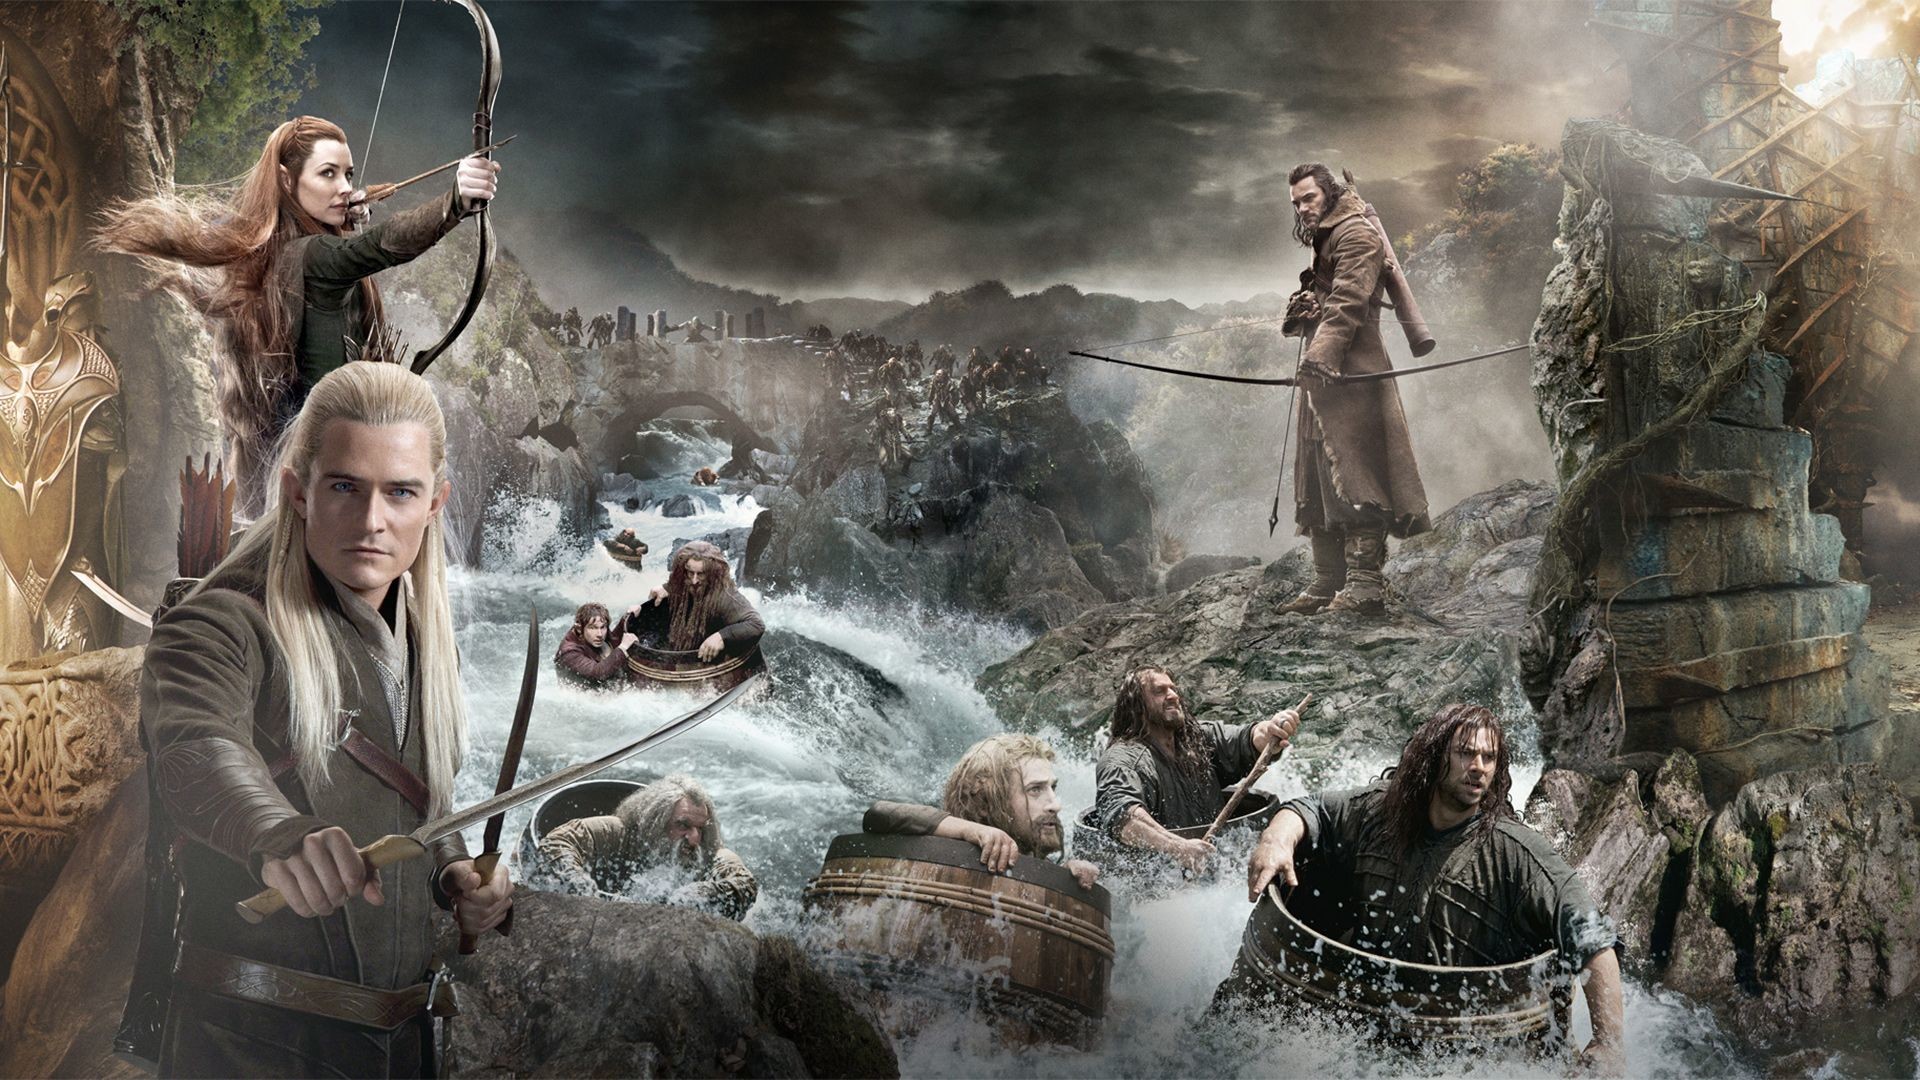 1920x1080 The Desolation of Smaug just a dream | The Hobbit: The Desolation of Smaug  Wallpaper generator - Movie .